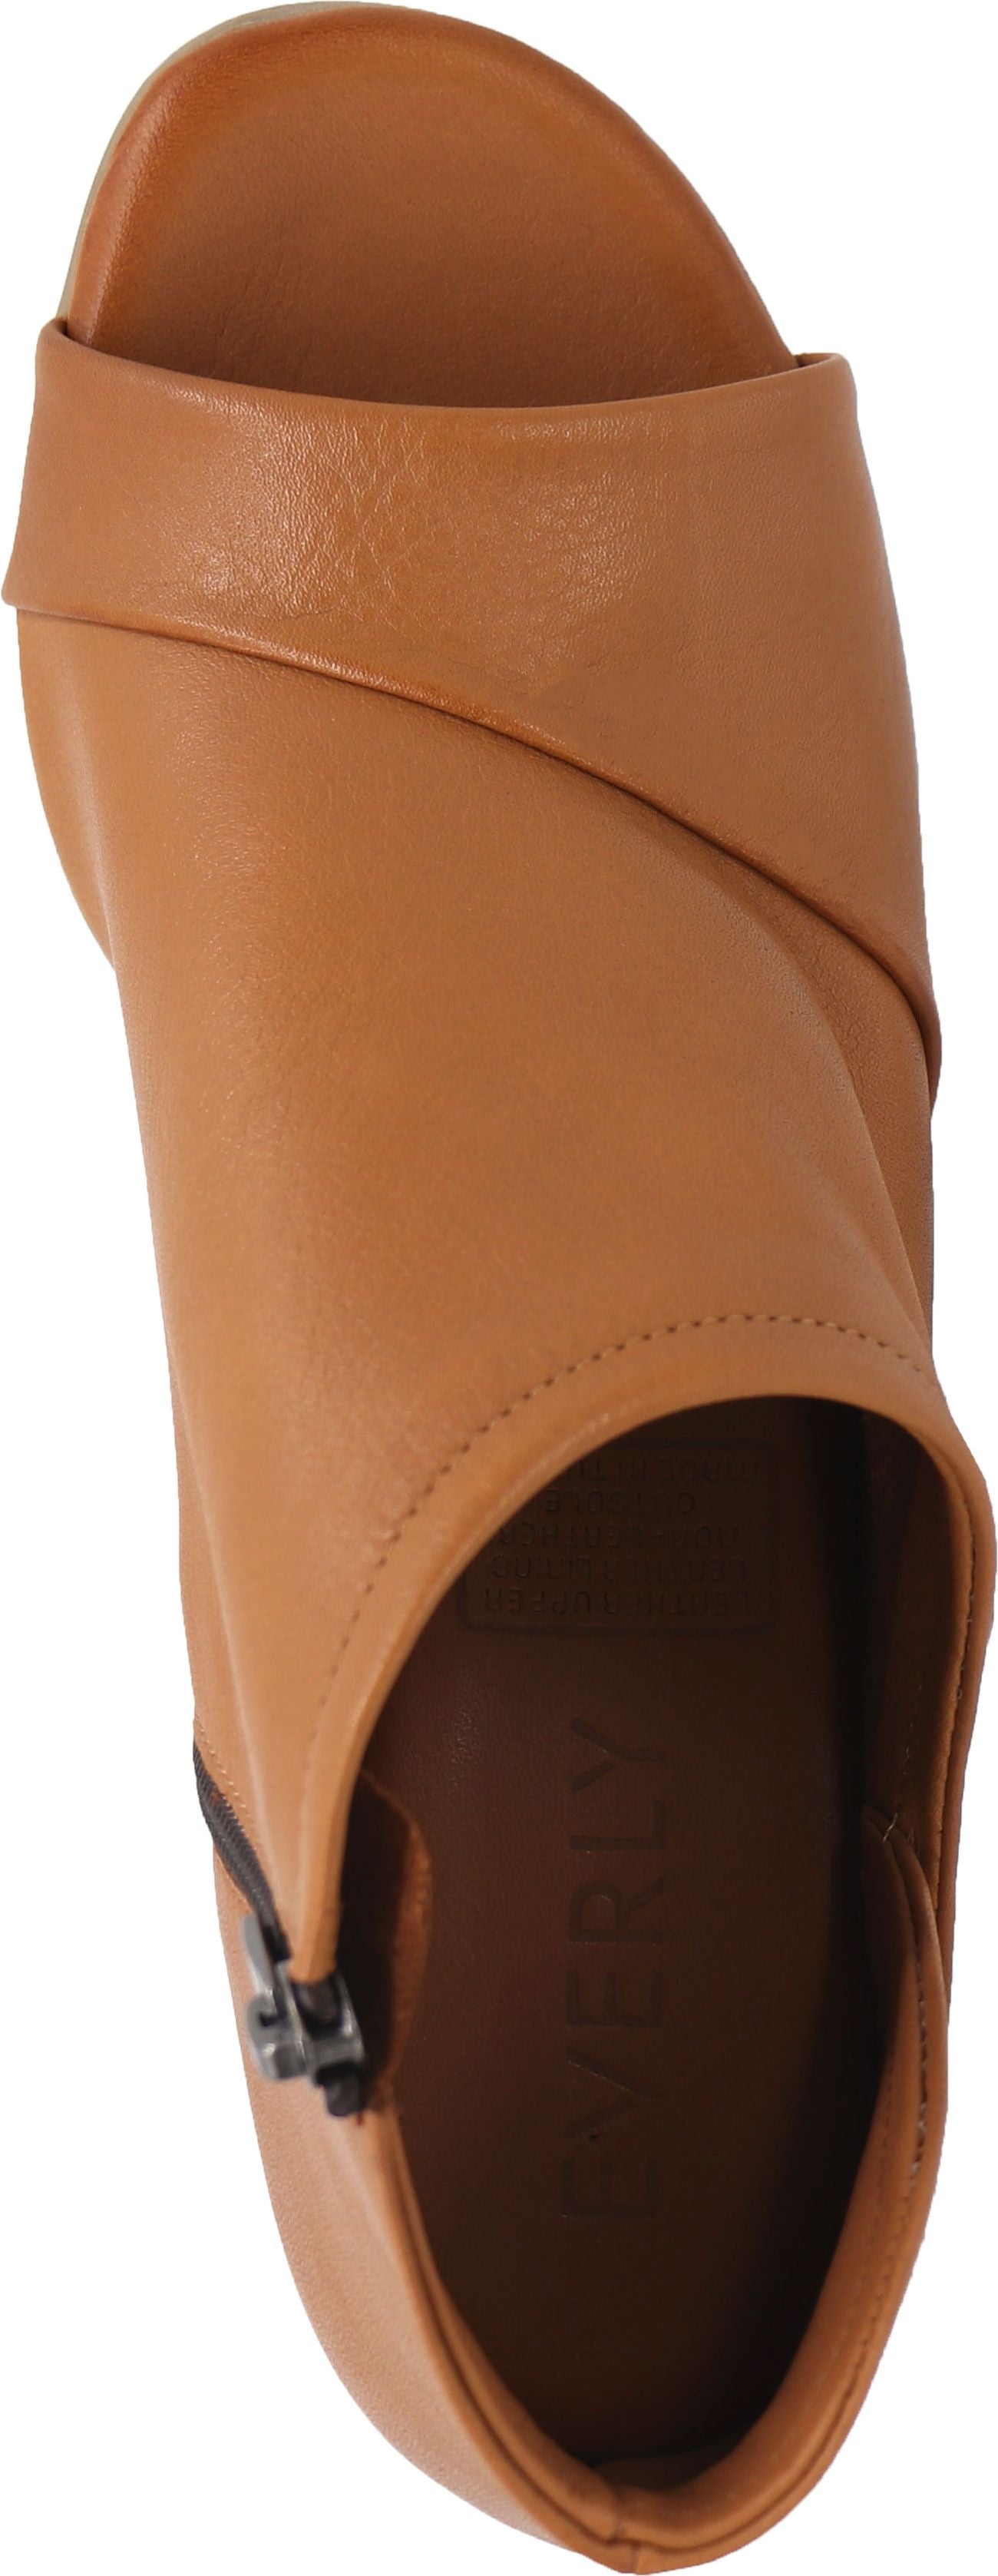 Everly Sandals Gia01 Tan